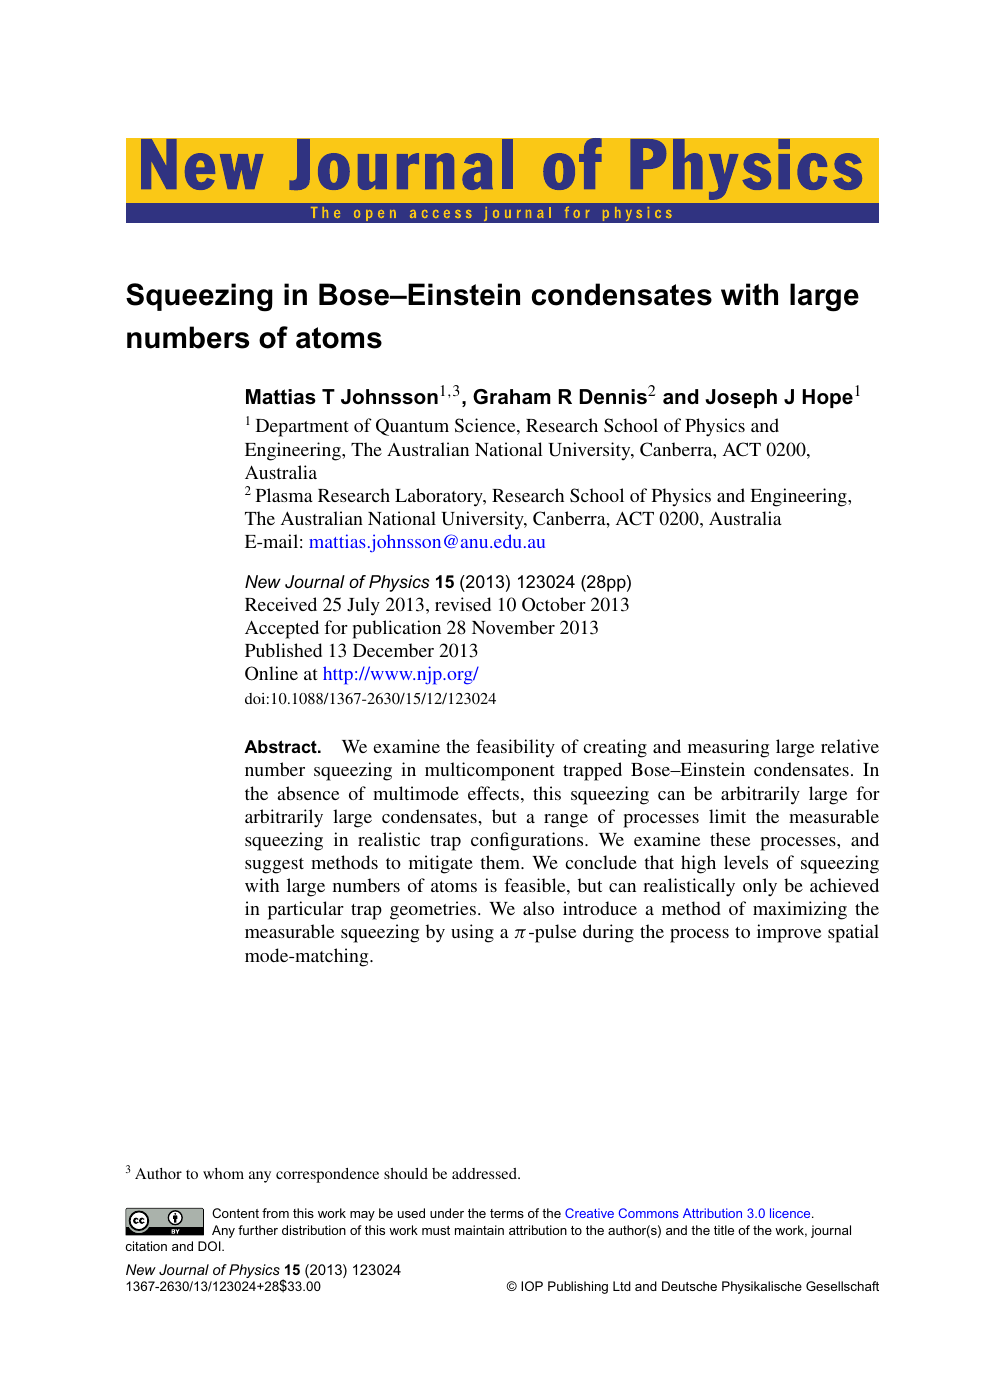 Squeezing In Bose Einstein Condensates With Large Numbers Of Atoms Topic Of Research Paper In Physical Sciences Download Scholarly Article Pdf And Read For Free On Cyberleninka Open Science Hub